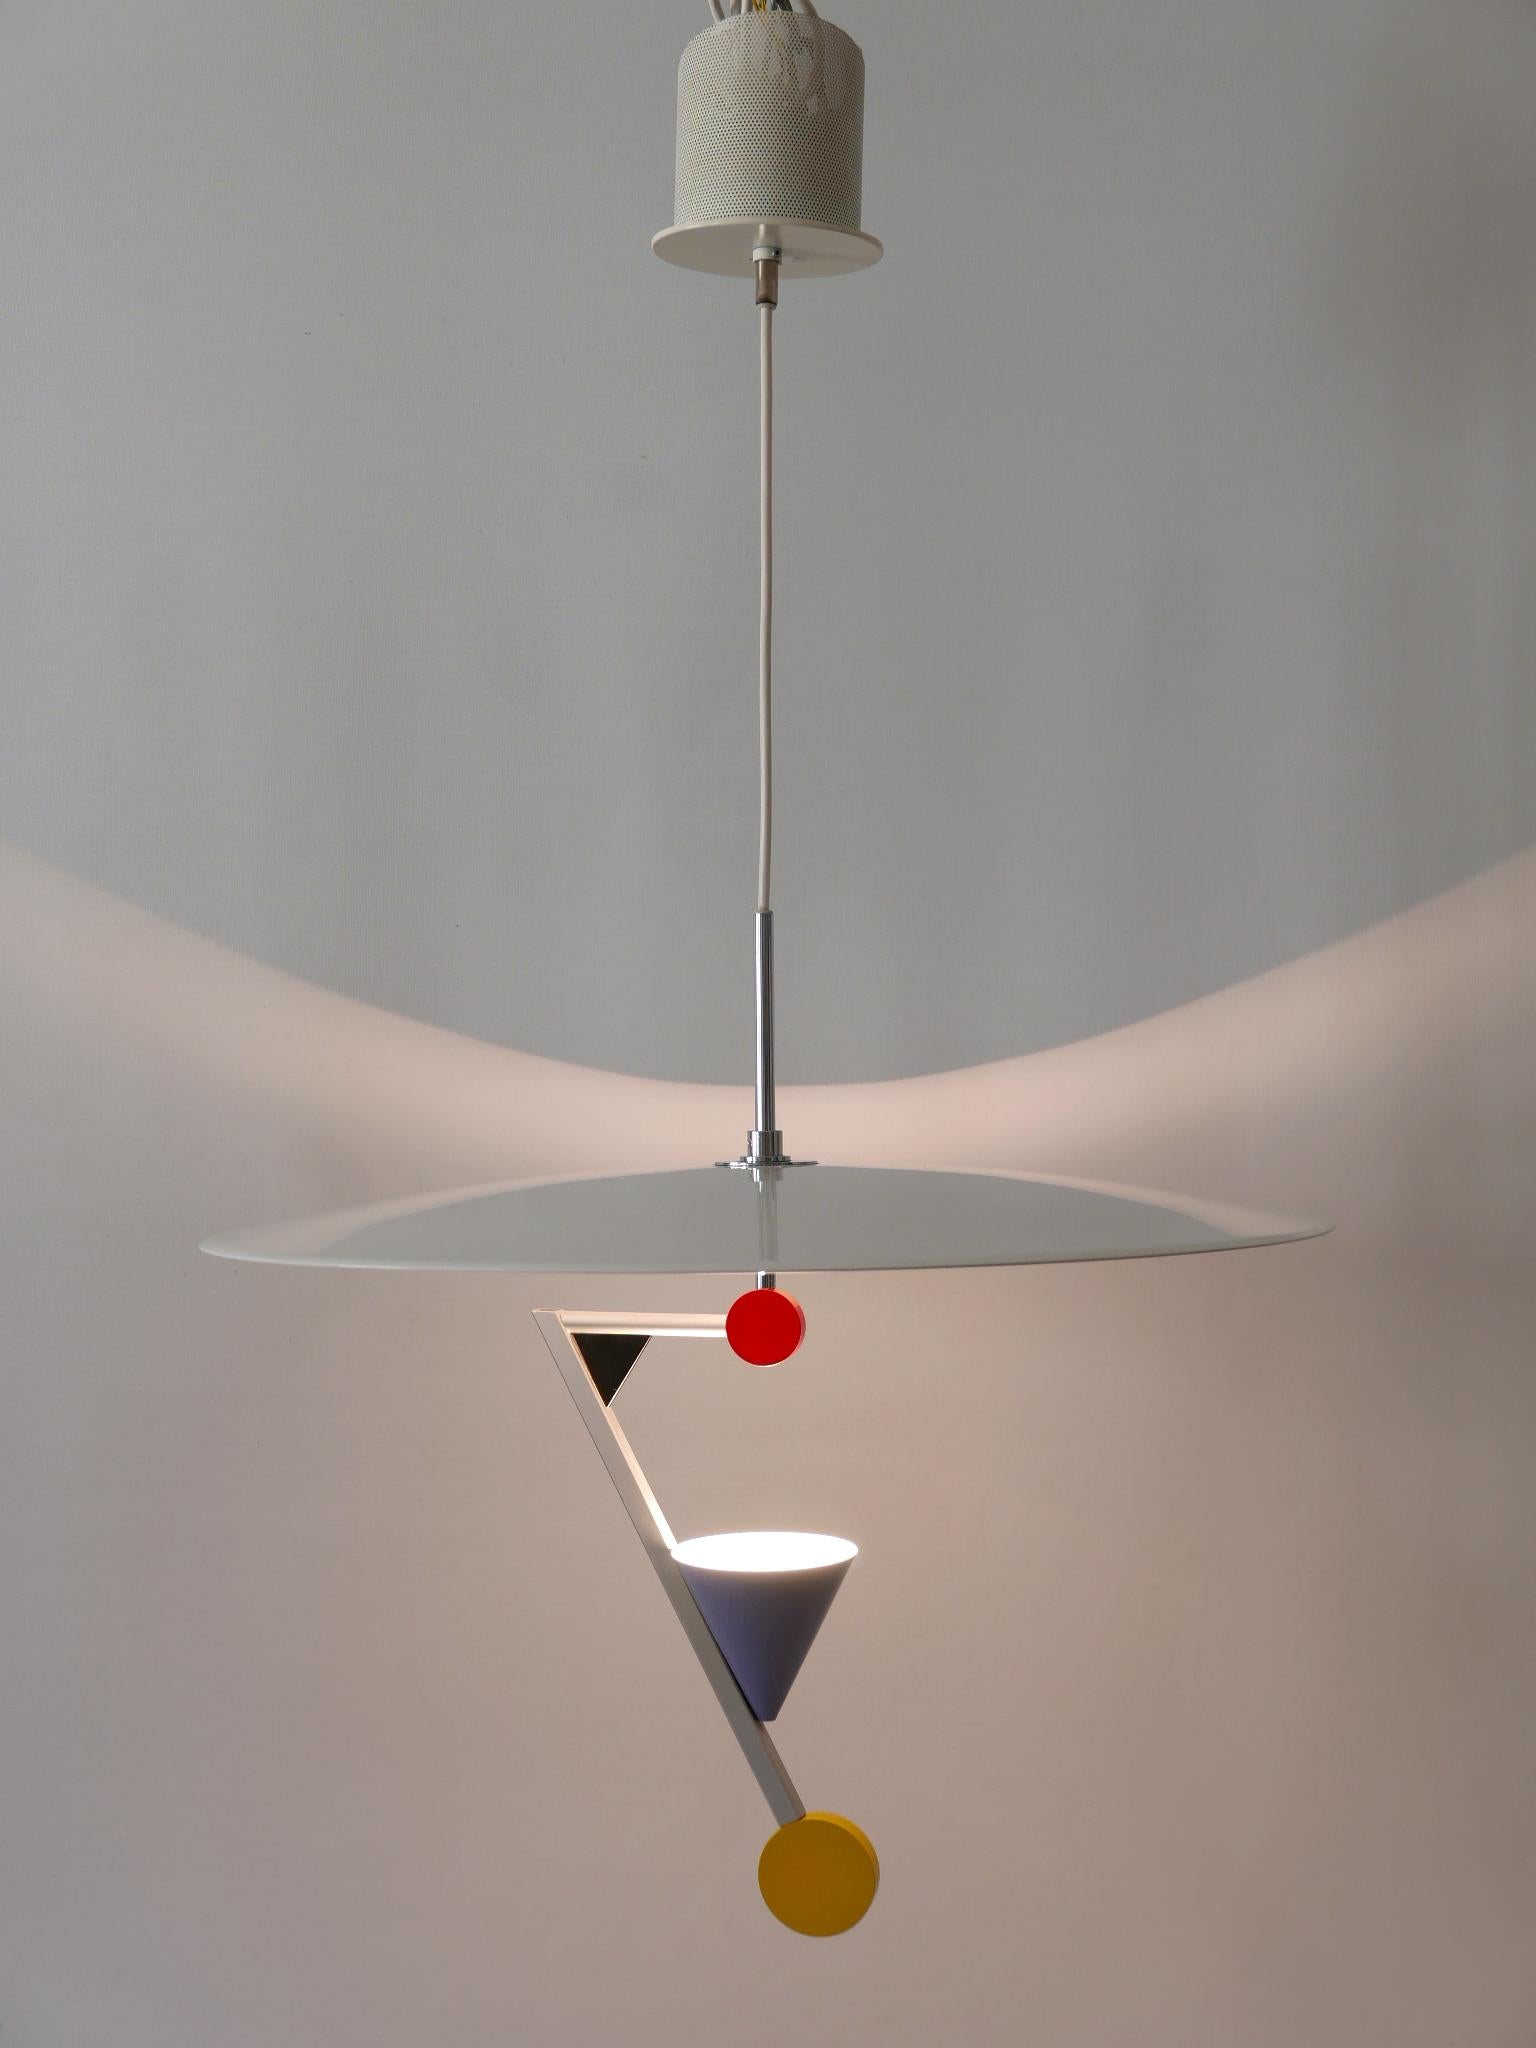 Mid-Century Modern Incroyables lampes suspendues postmodernes Halo There d'Olle Andersson pour Borens 1982 en vente